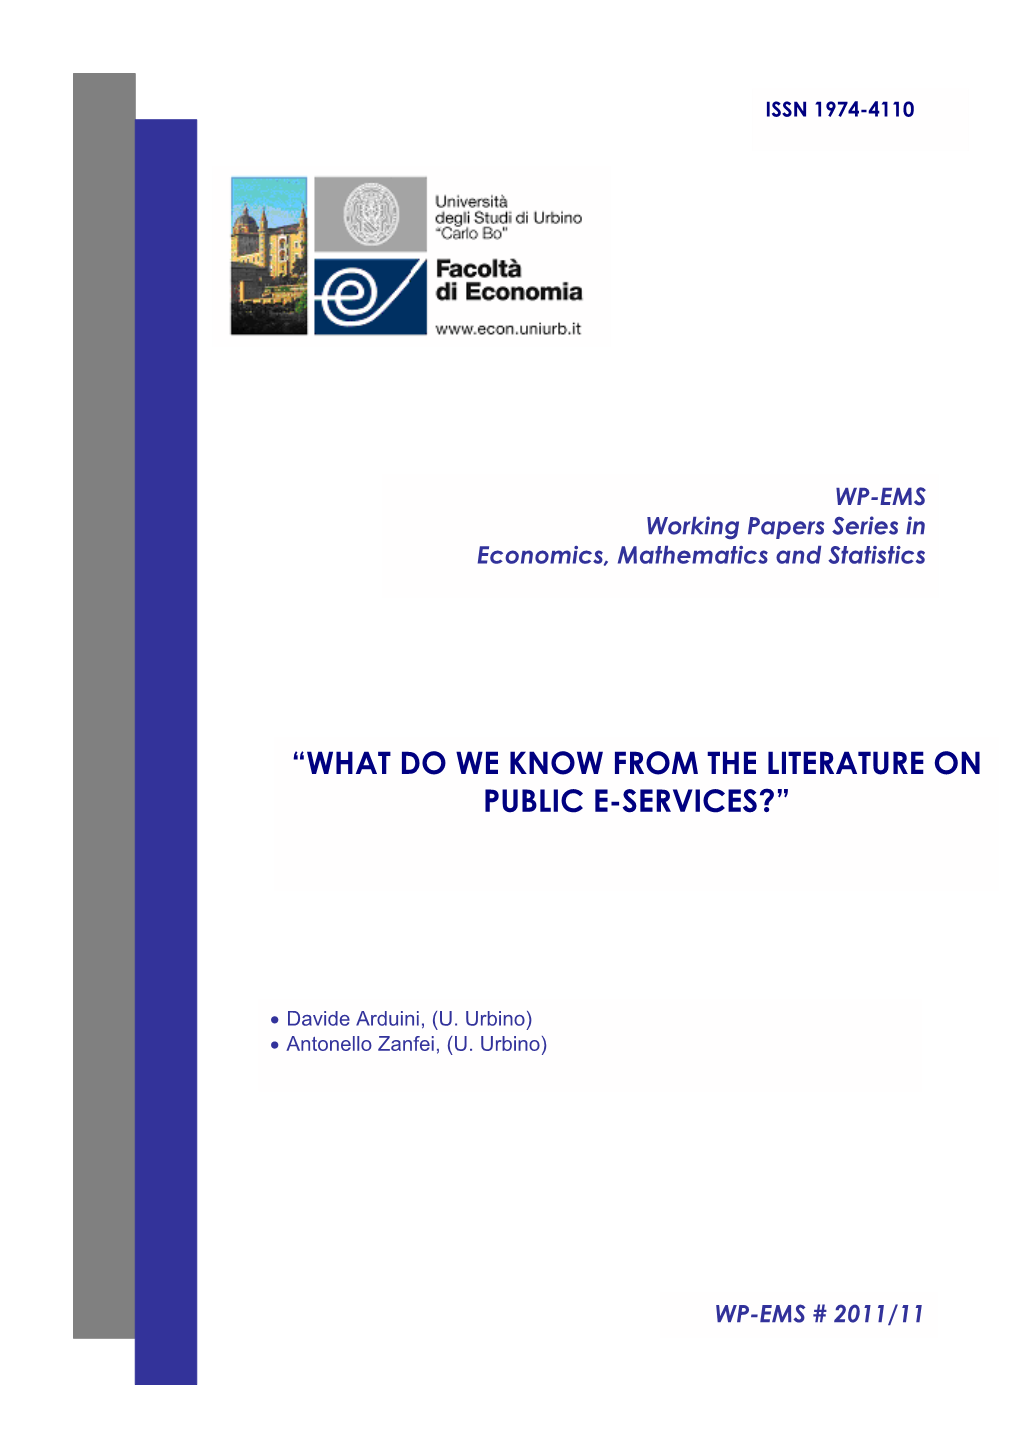 What Do We Know from the Literature on Public E-Services?”